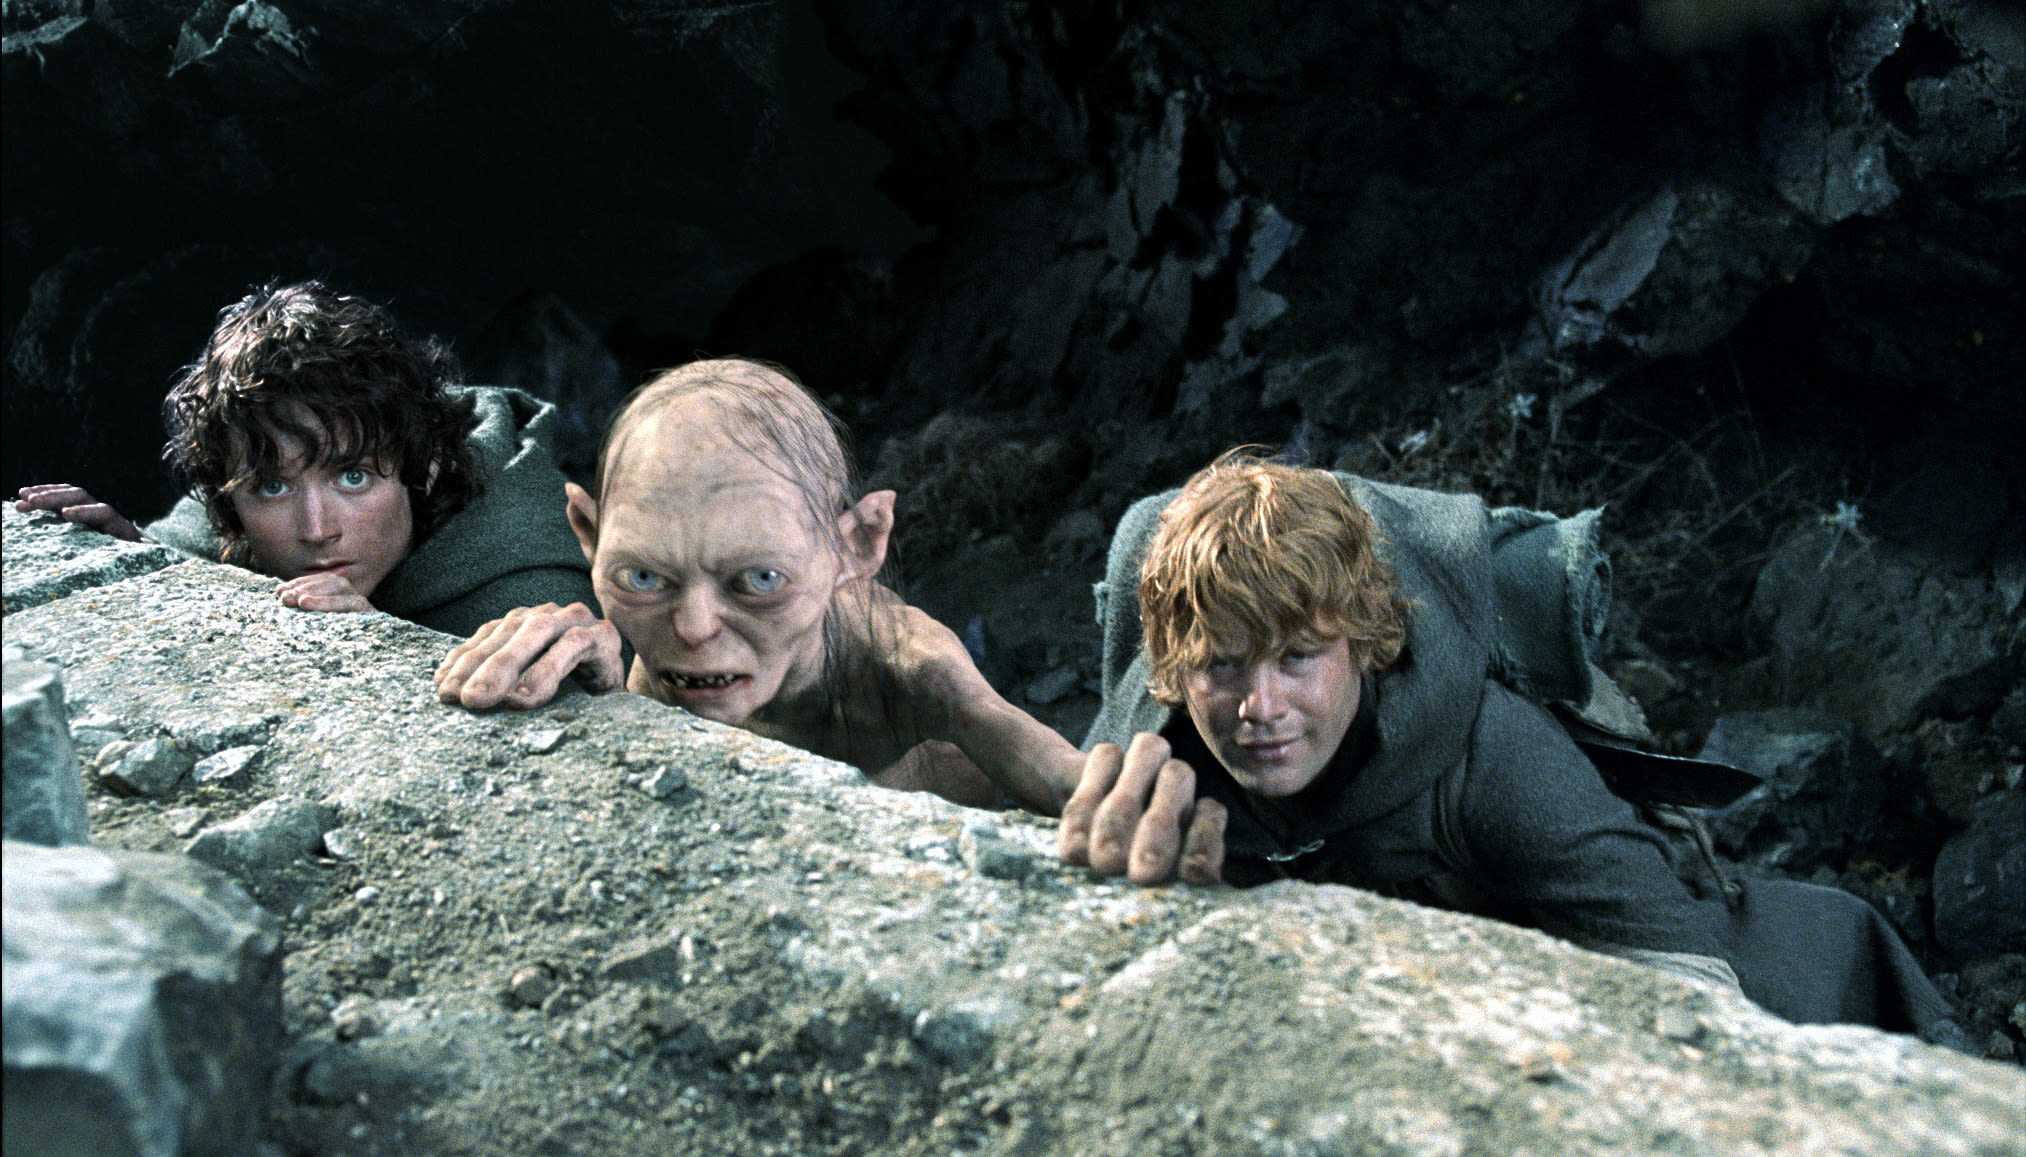 'The Lord of the Rings' will return with two new movies. First: 'The Hunt for Gollum'